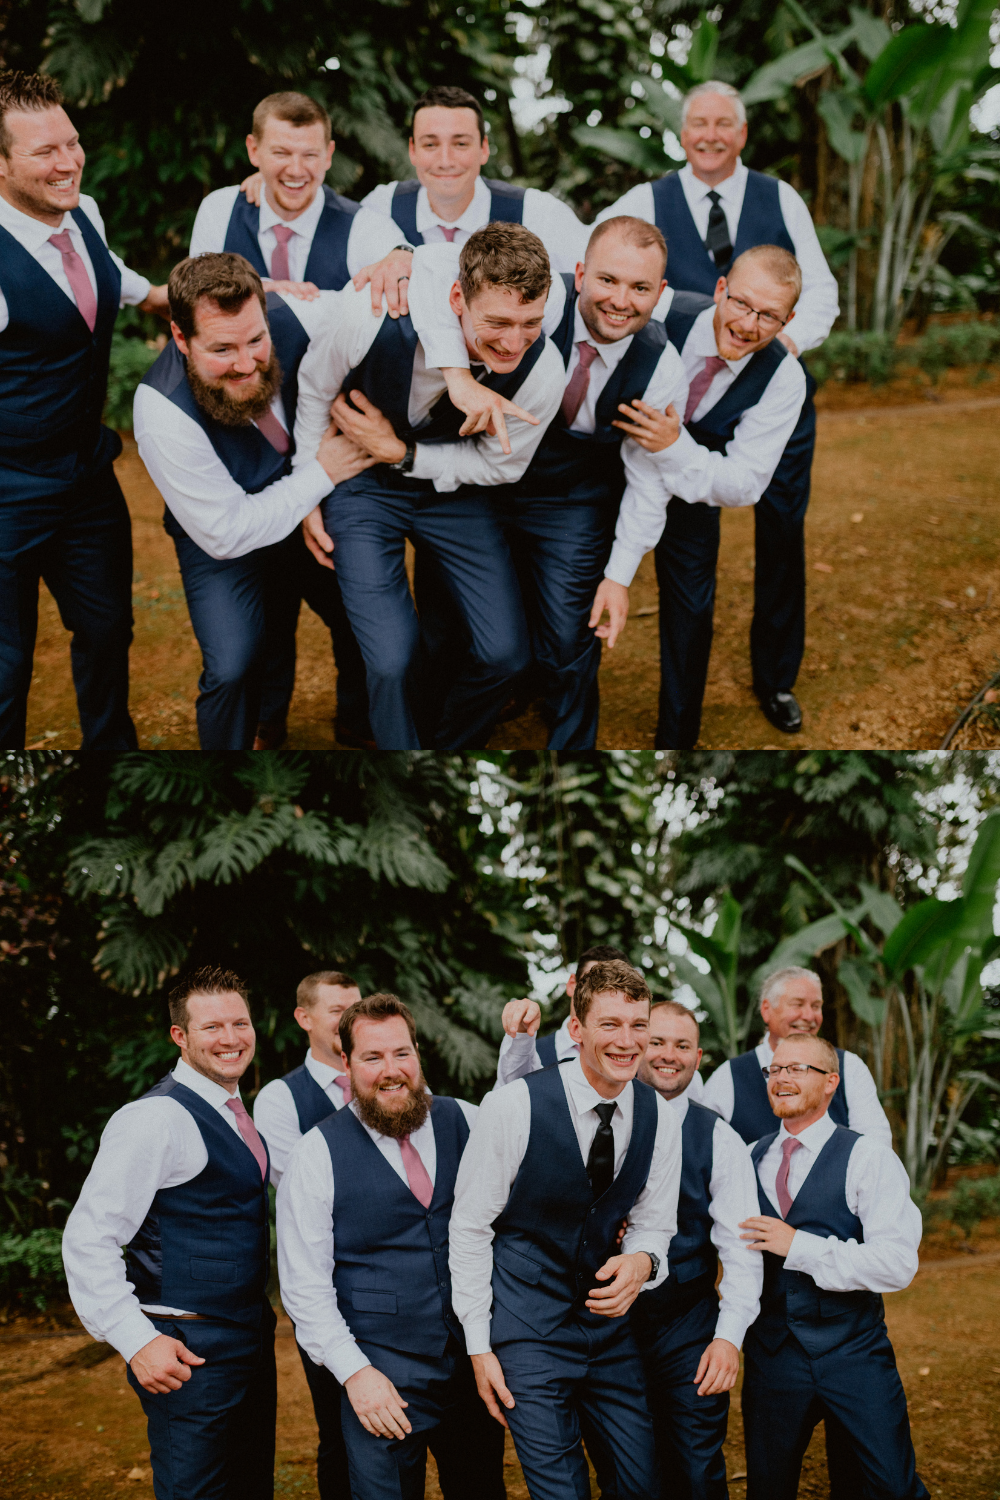 Groom and groomsmen dressed in dark blue suits and pink ties laugh in front of jungle | Oahu Wedding Photographer, Oahu Elopement Photographer, Destination Wedding Photographer, Destination Elopement Photographer, Newlywed moments ideas, Newlywed Photography inspiration, Hawaii Elopement ideas | chelseaabril.com